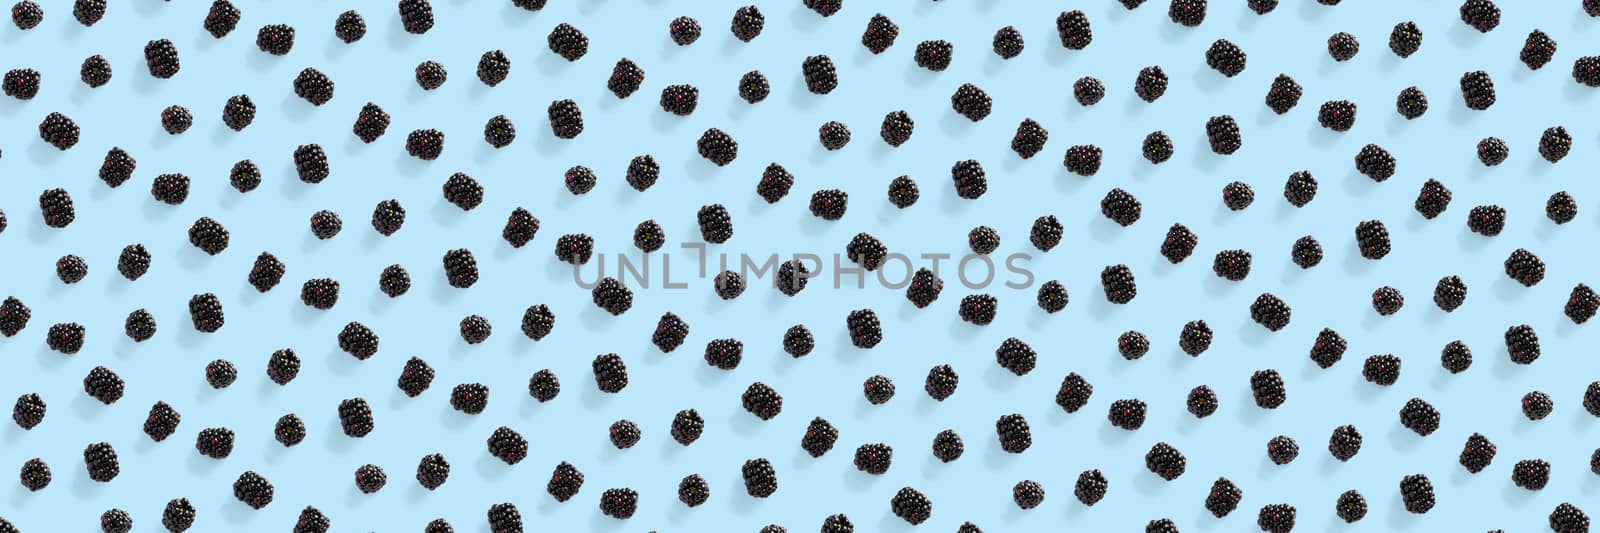 Banner Background from isolated brambles. Group of tasty ripe blackberry isolated on blue background. modern crative background of falling blackberry or bramble.